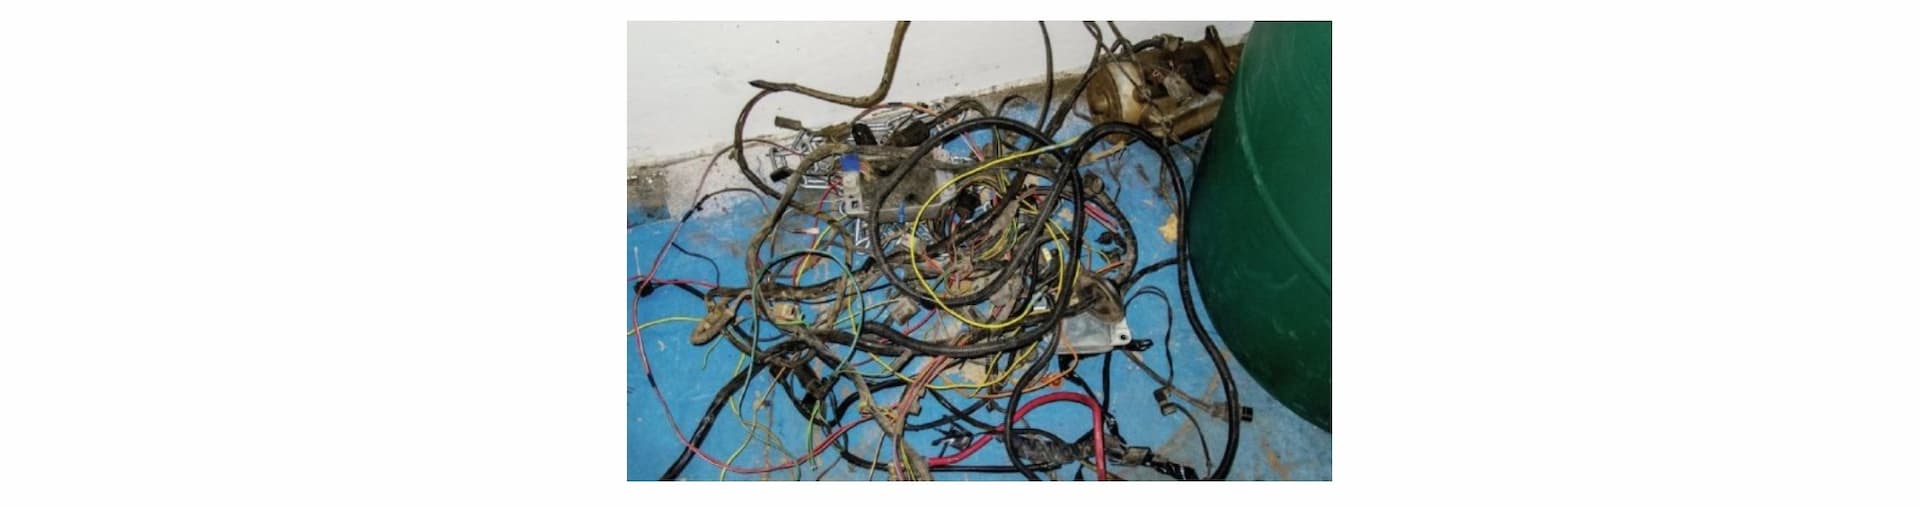 messy wires mixed together